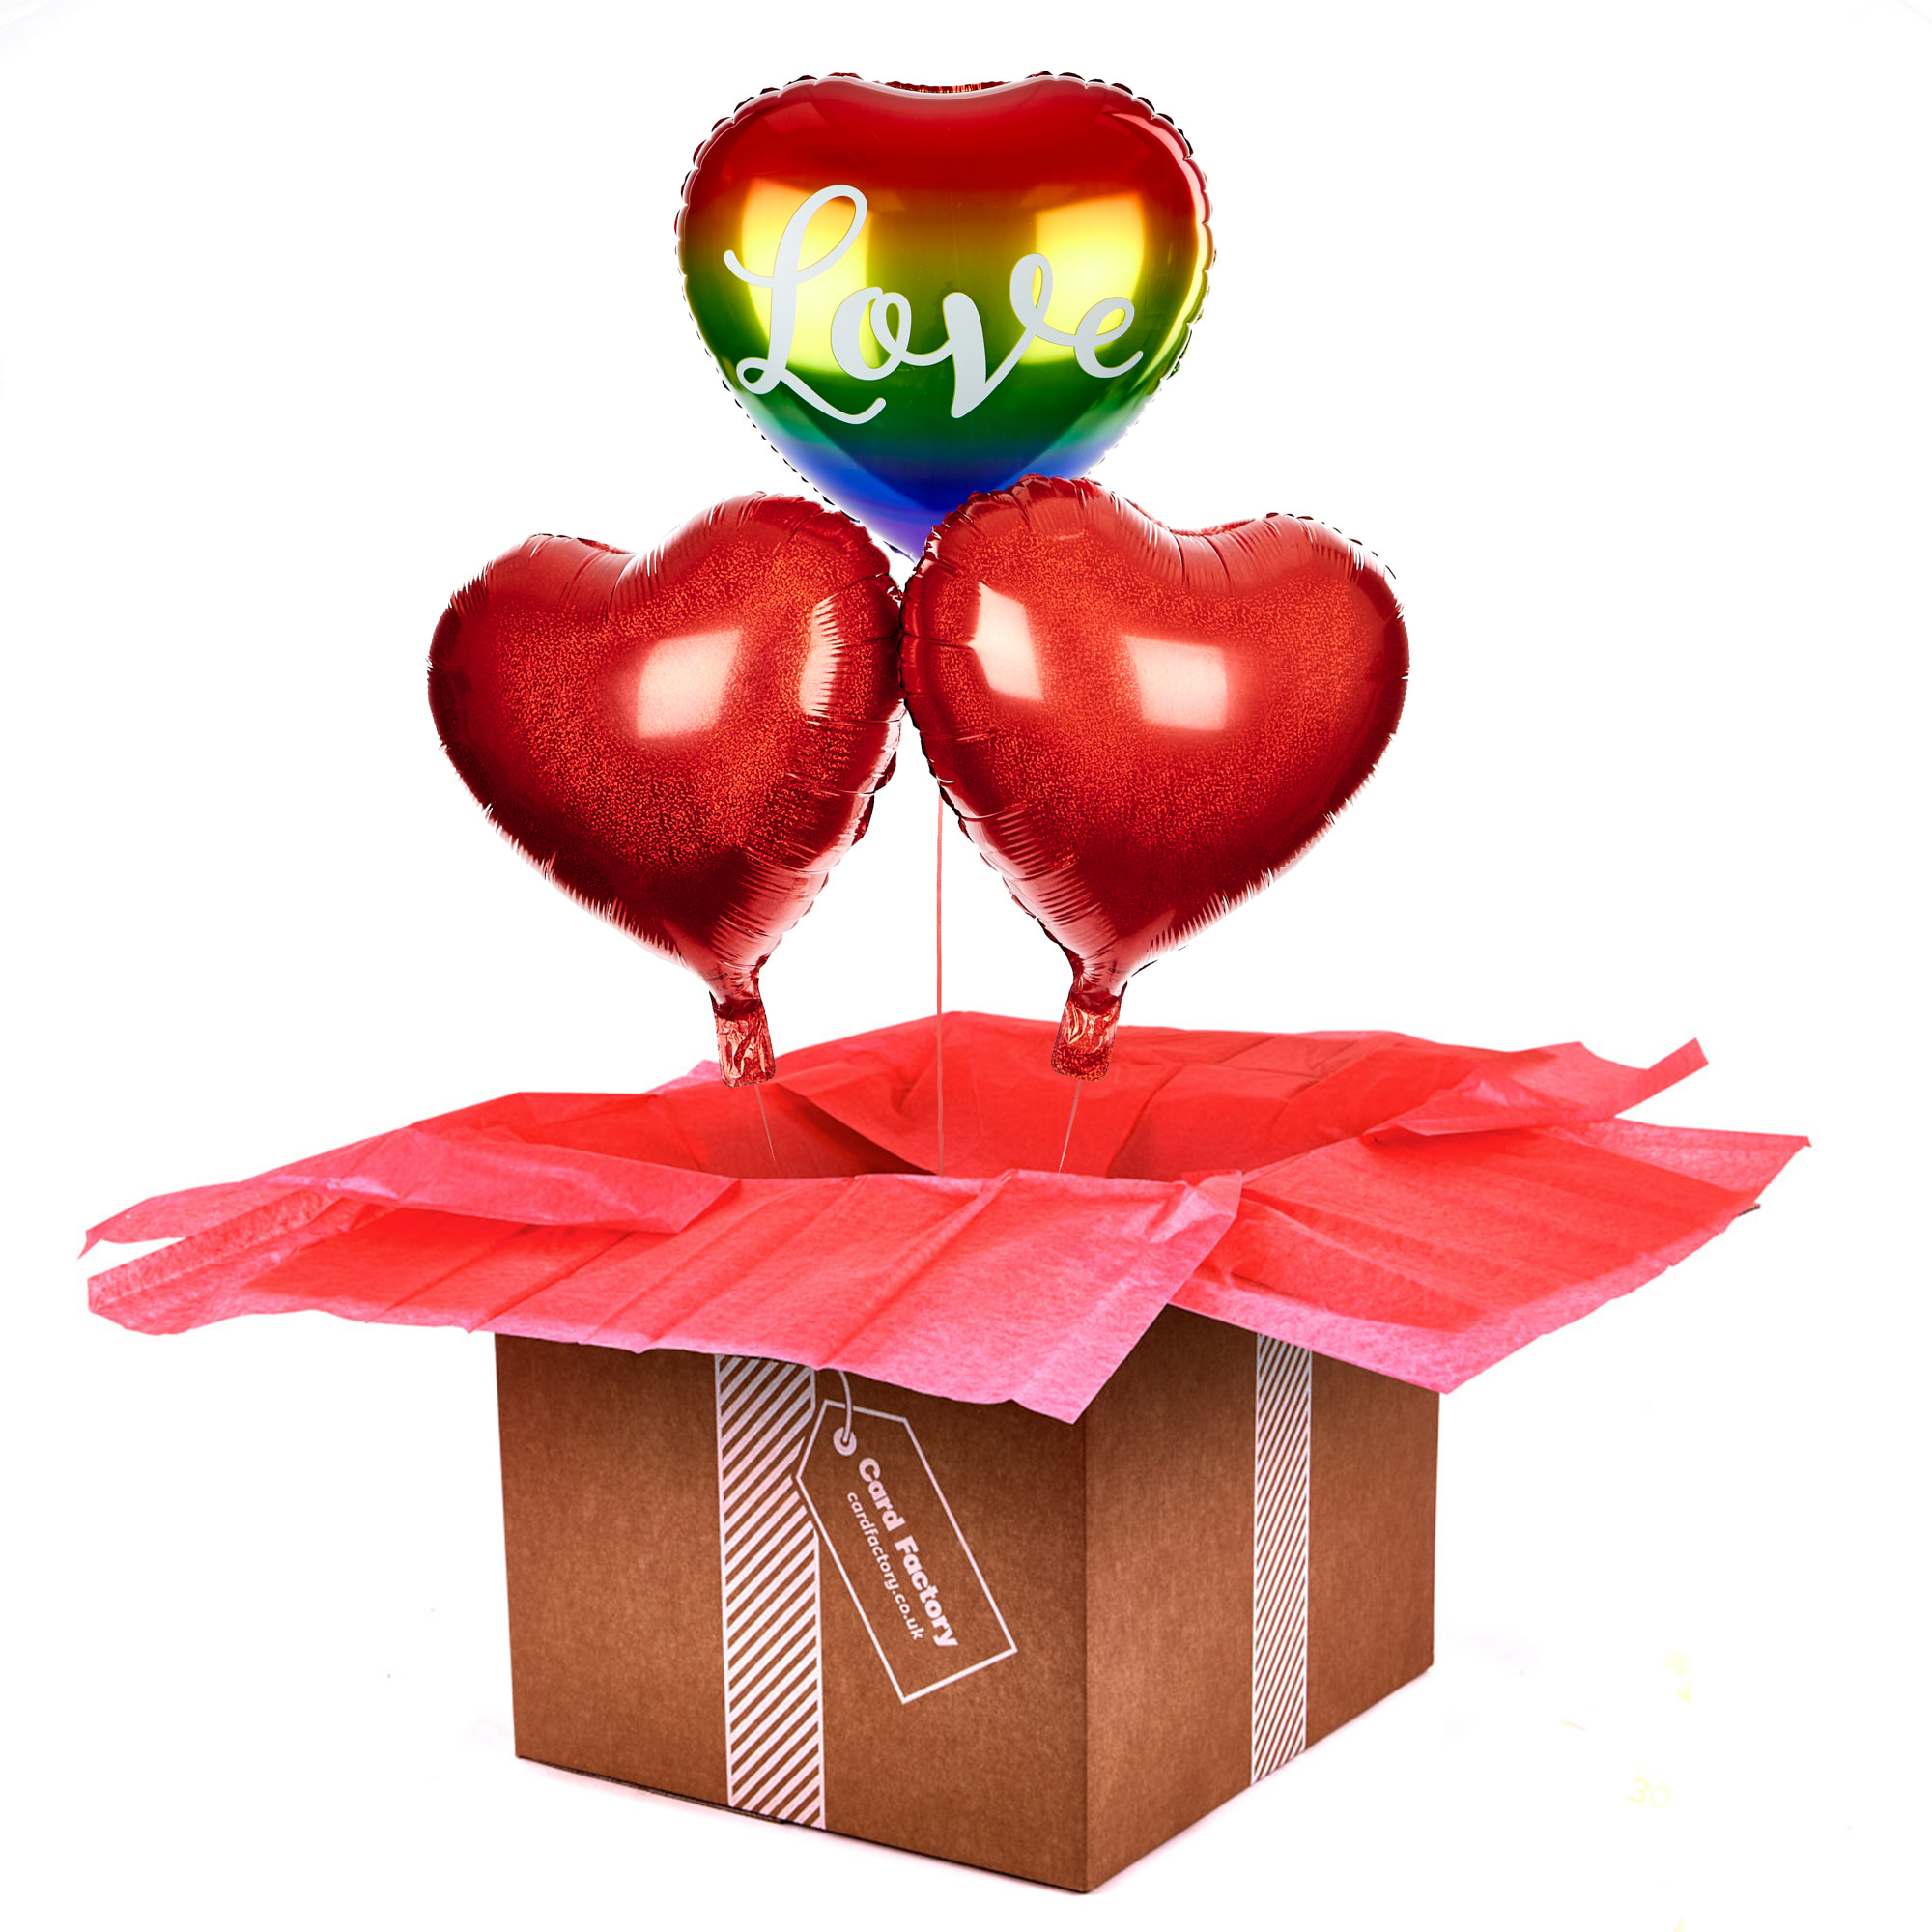 Rainbow Love Heart Balloon Bouquet - DELIVERED INFLATED!